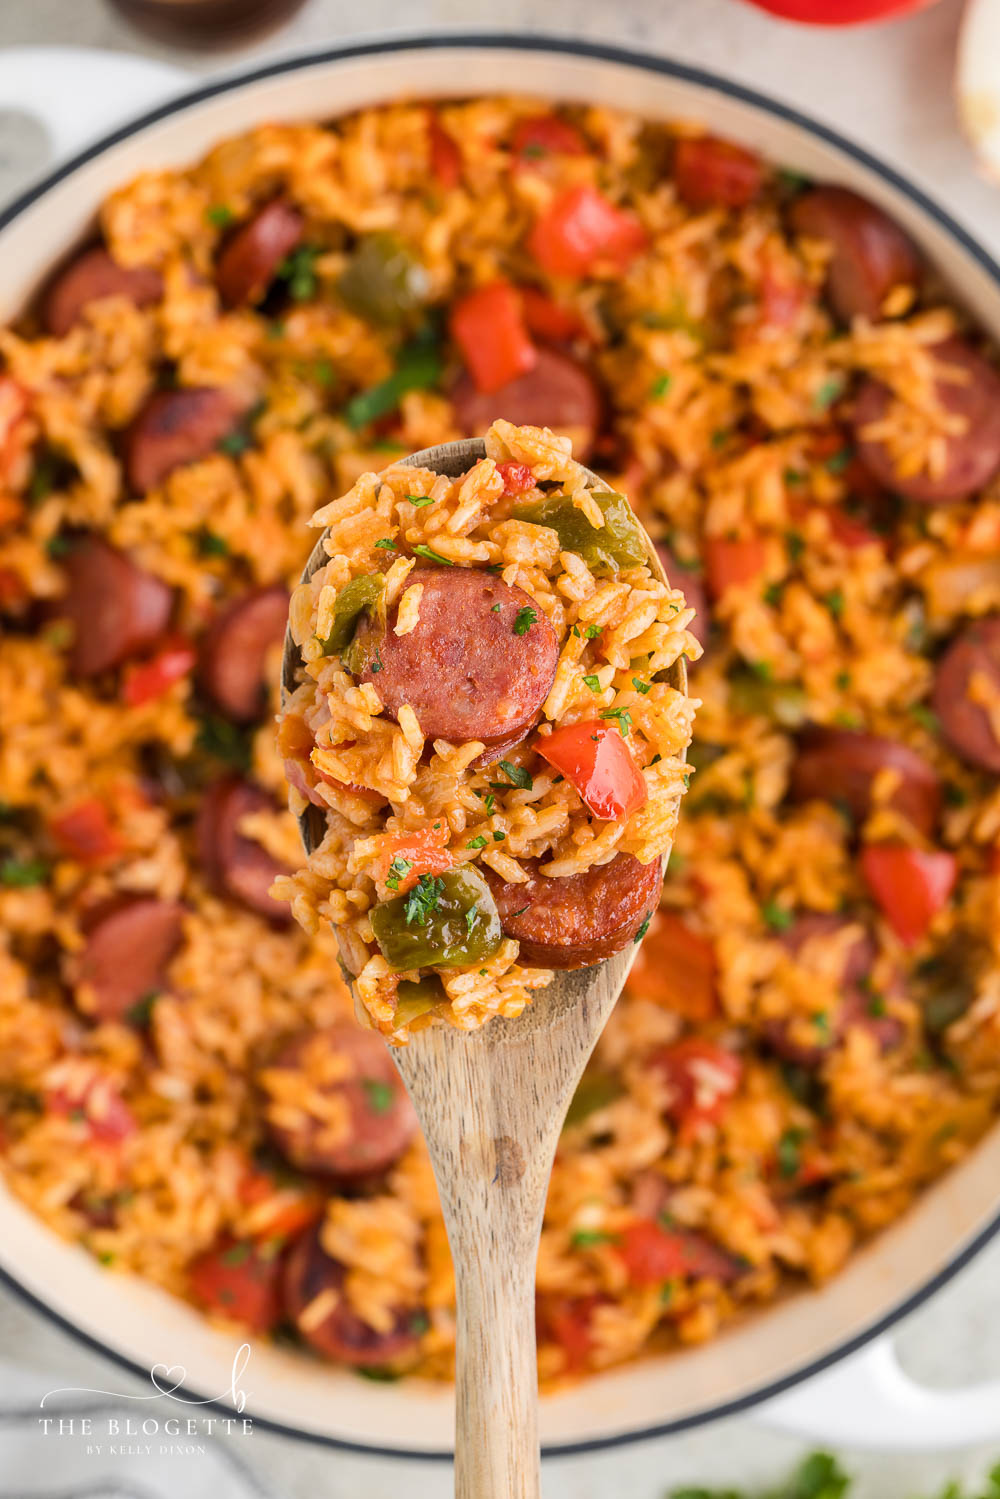 This Sausage and Rice Skillet features smoky sausage sizzled with sweet bell pepper, onions, and garlic in vibrant tomato sauce.